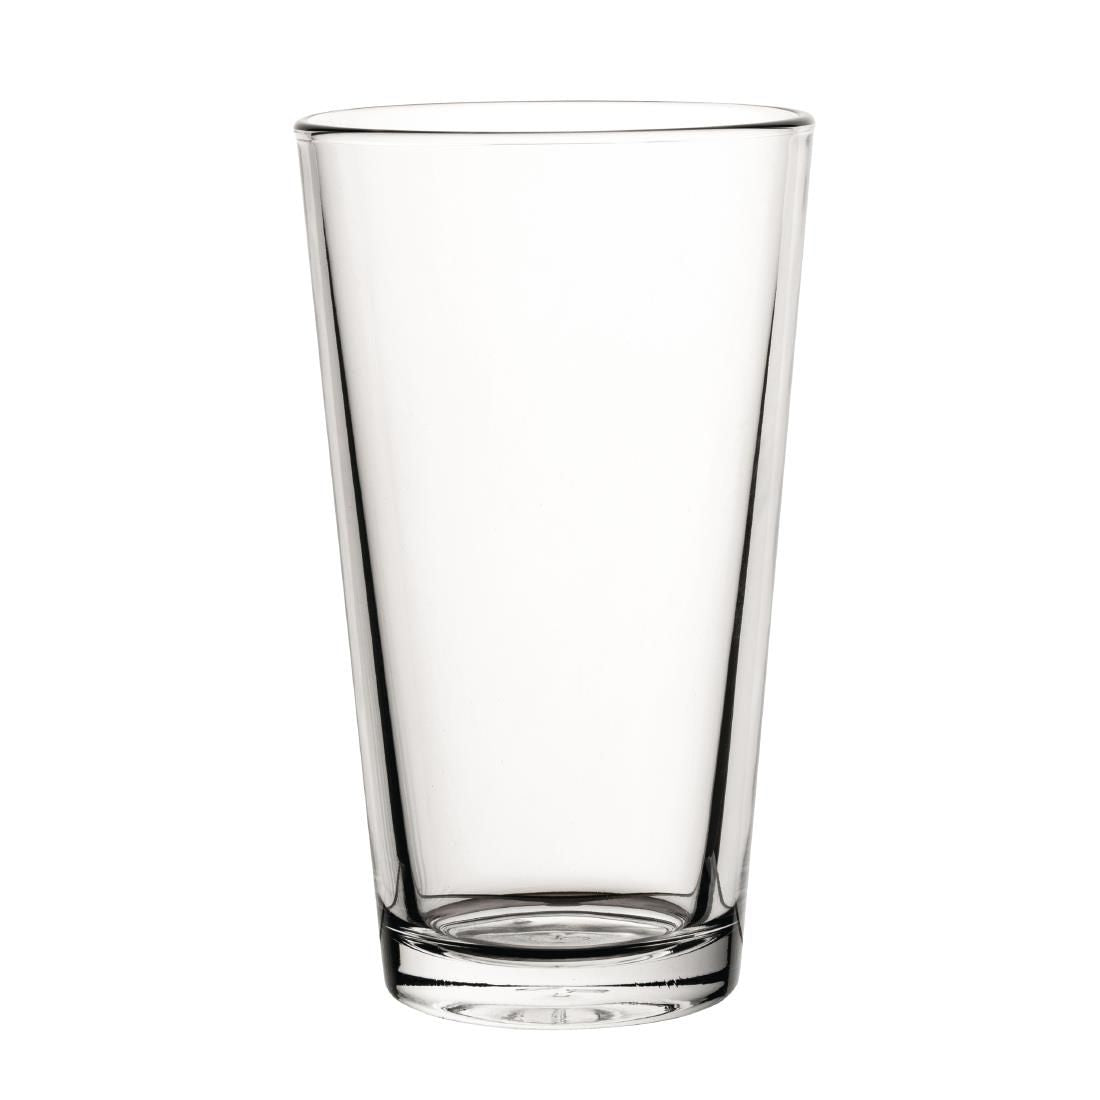 CW156 Utopia Parma Shaker Glasses 450ml (Pack of 24) JD Catering Equipment Solutions Ltd